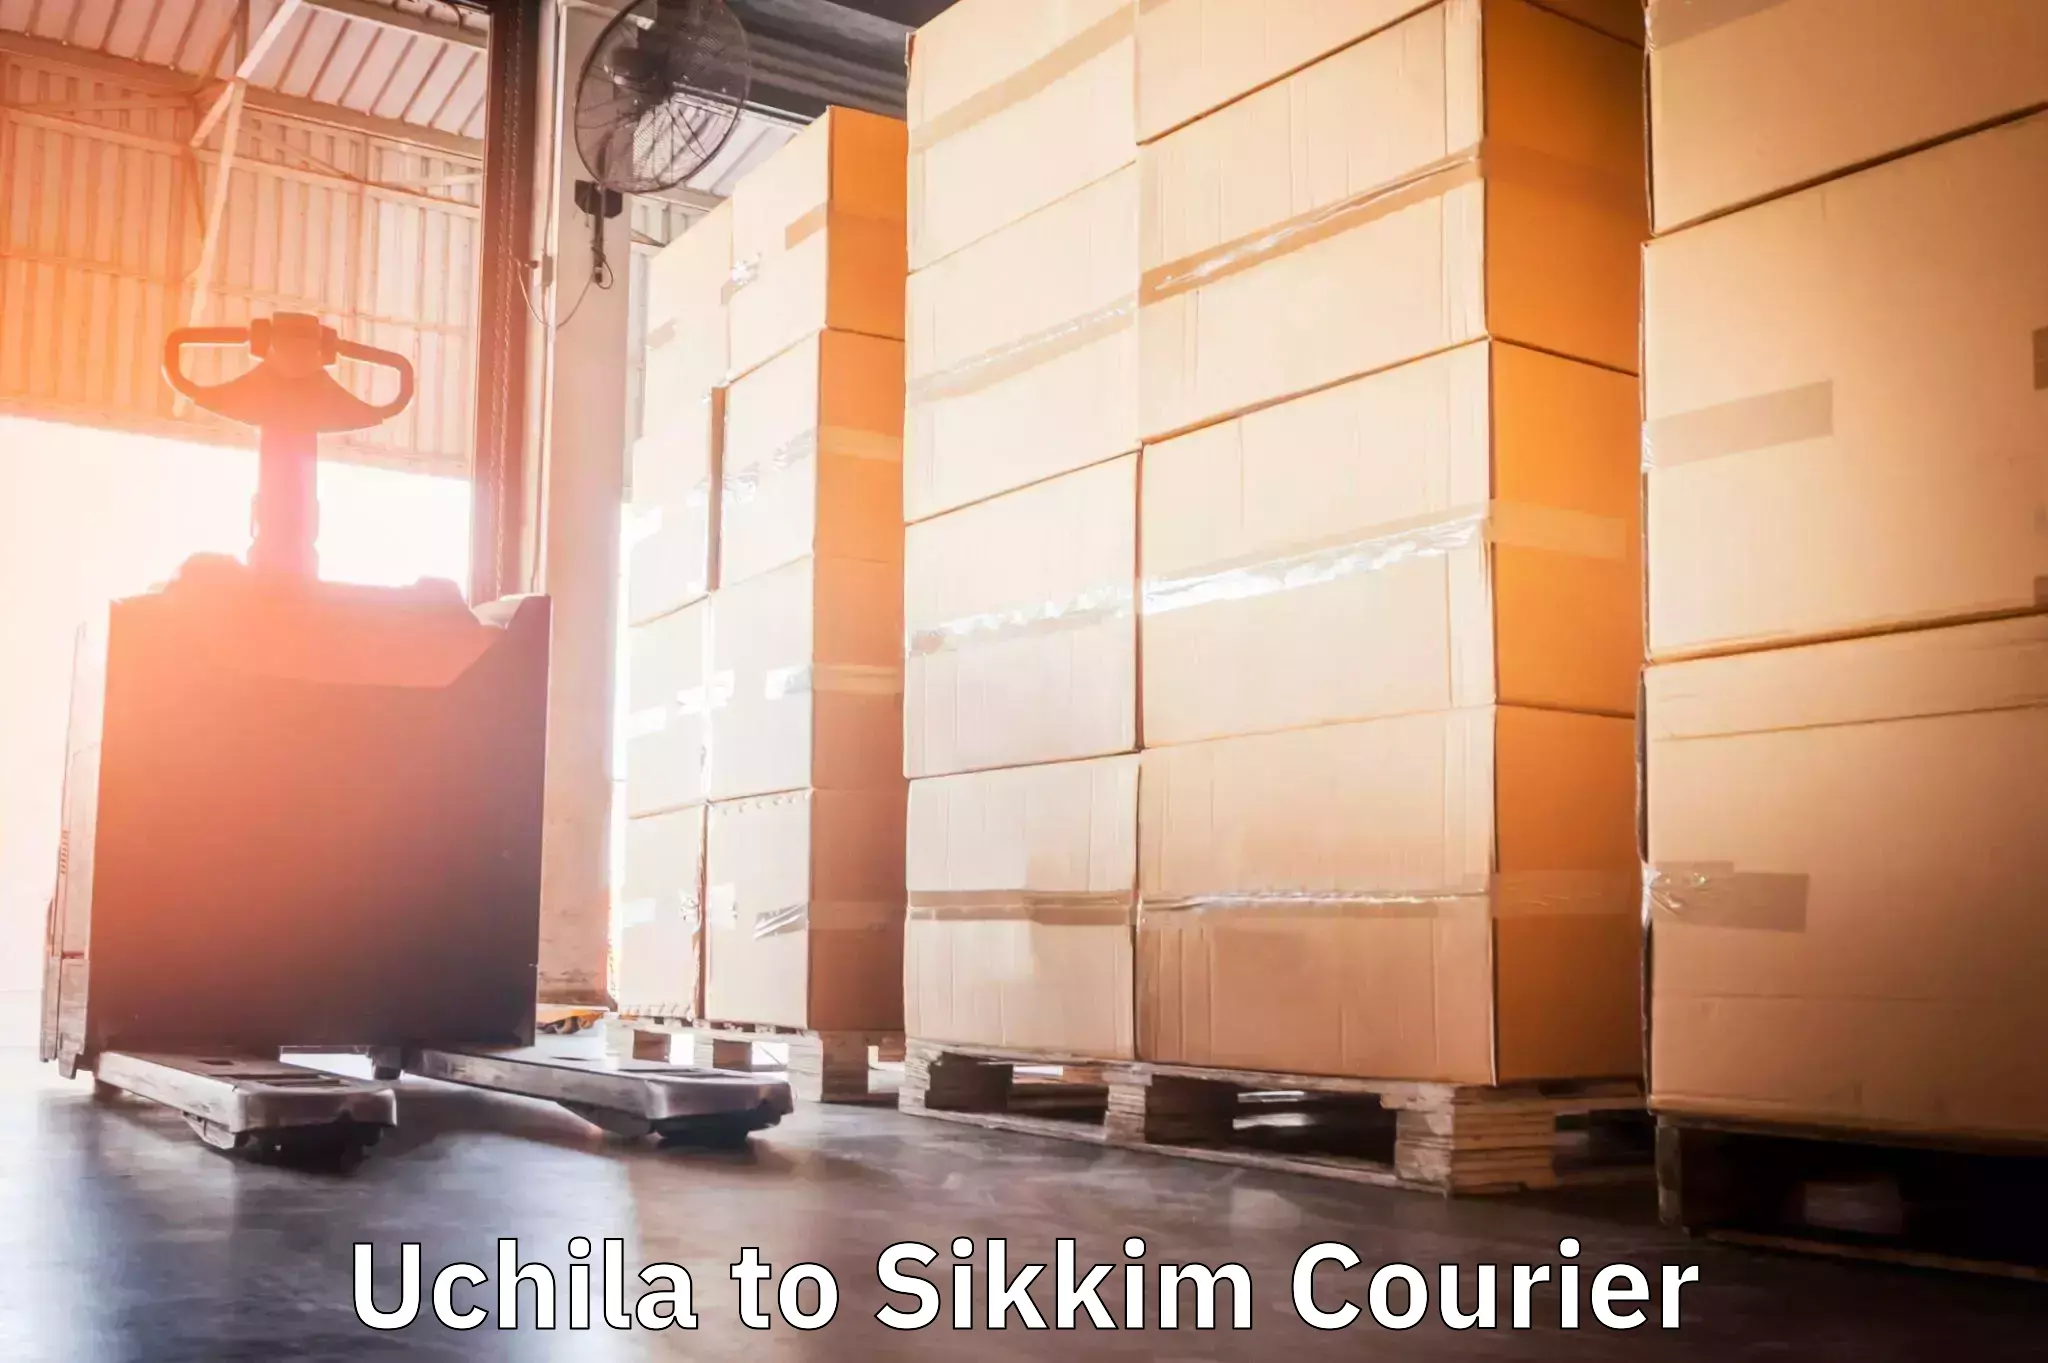 Advanced shipping technology in Uchila to North Sikkim